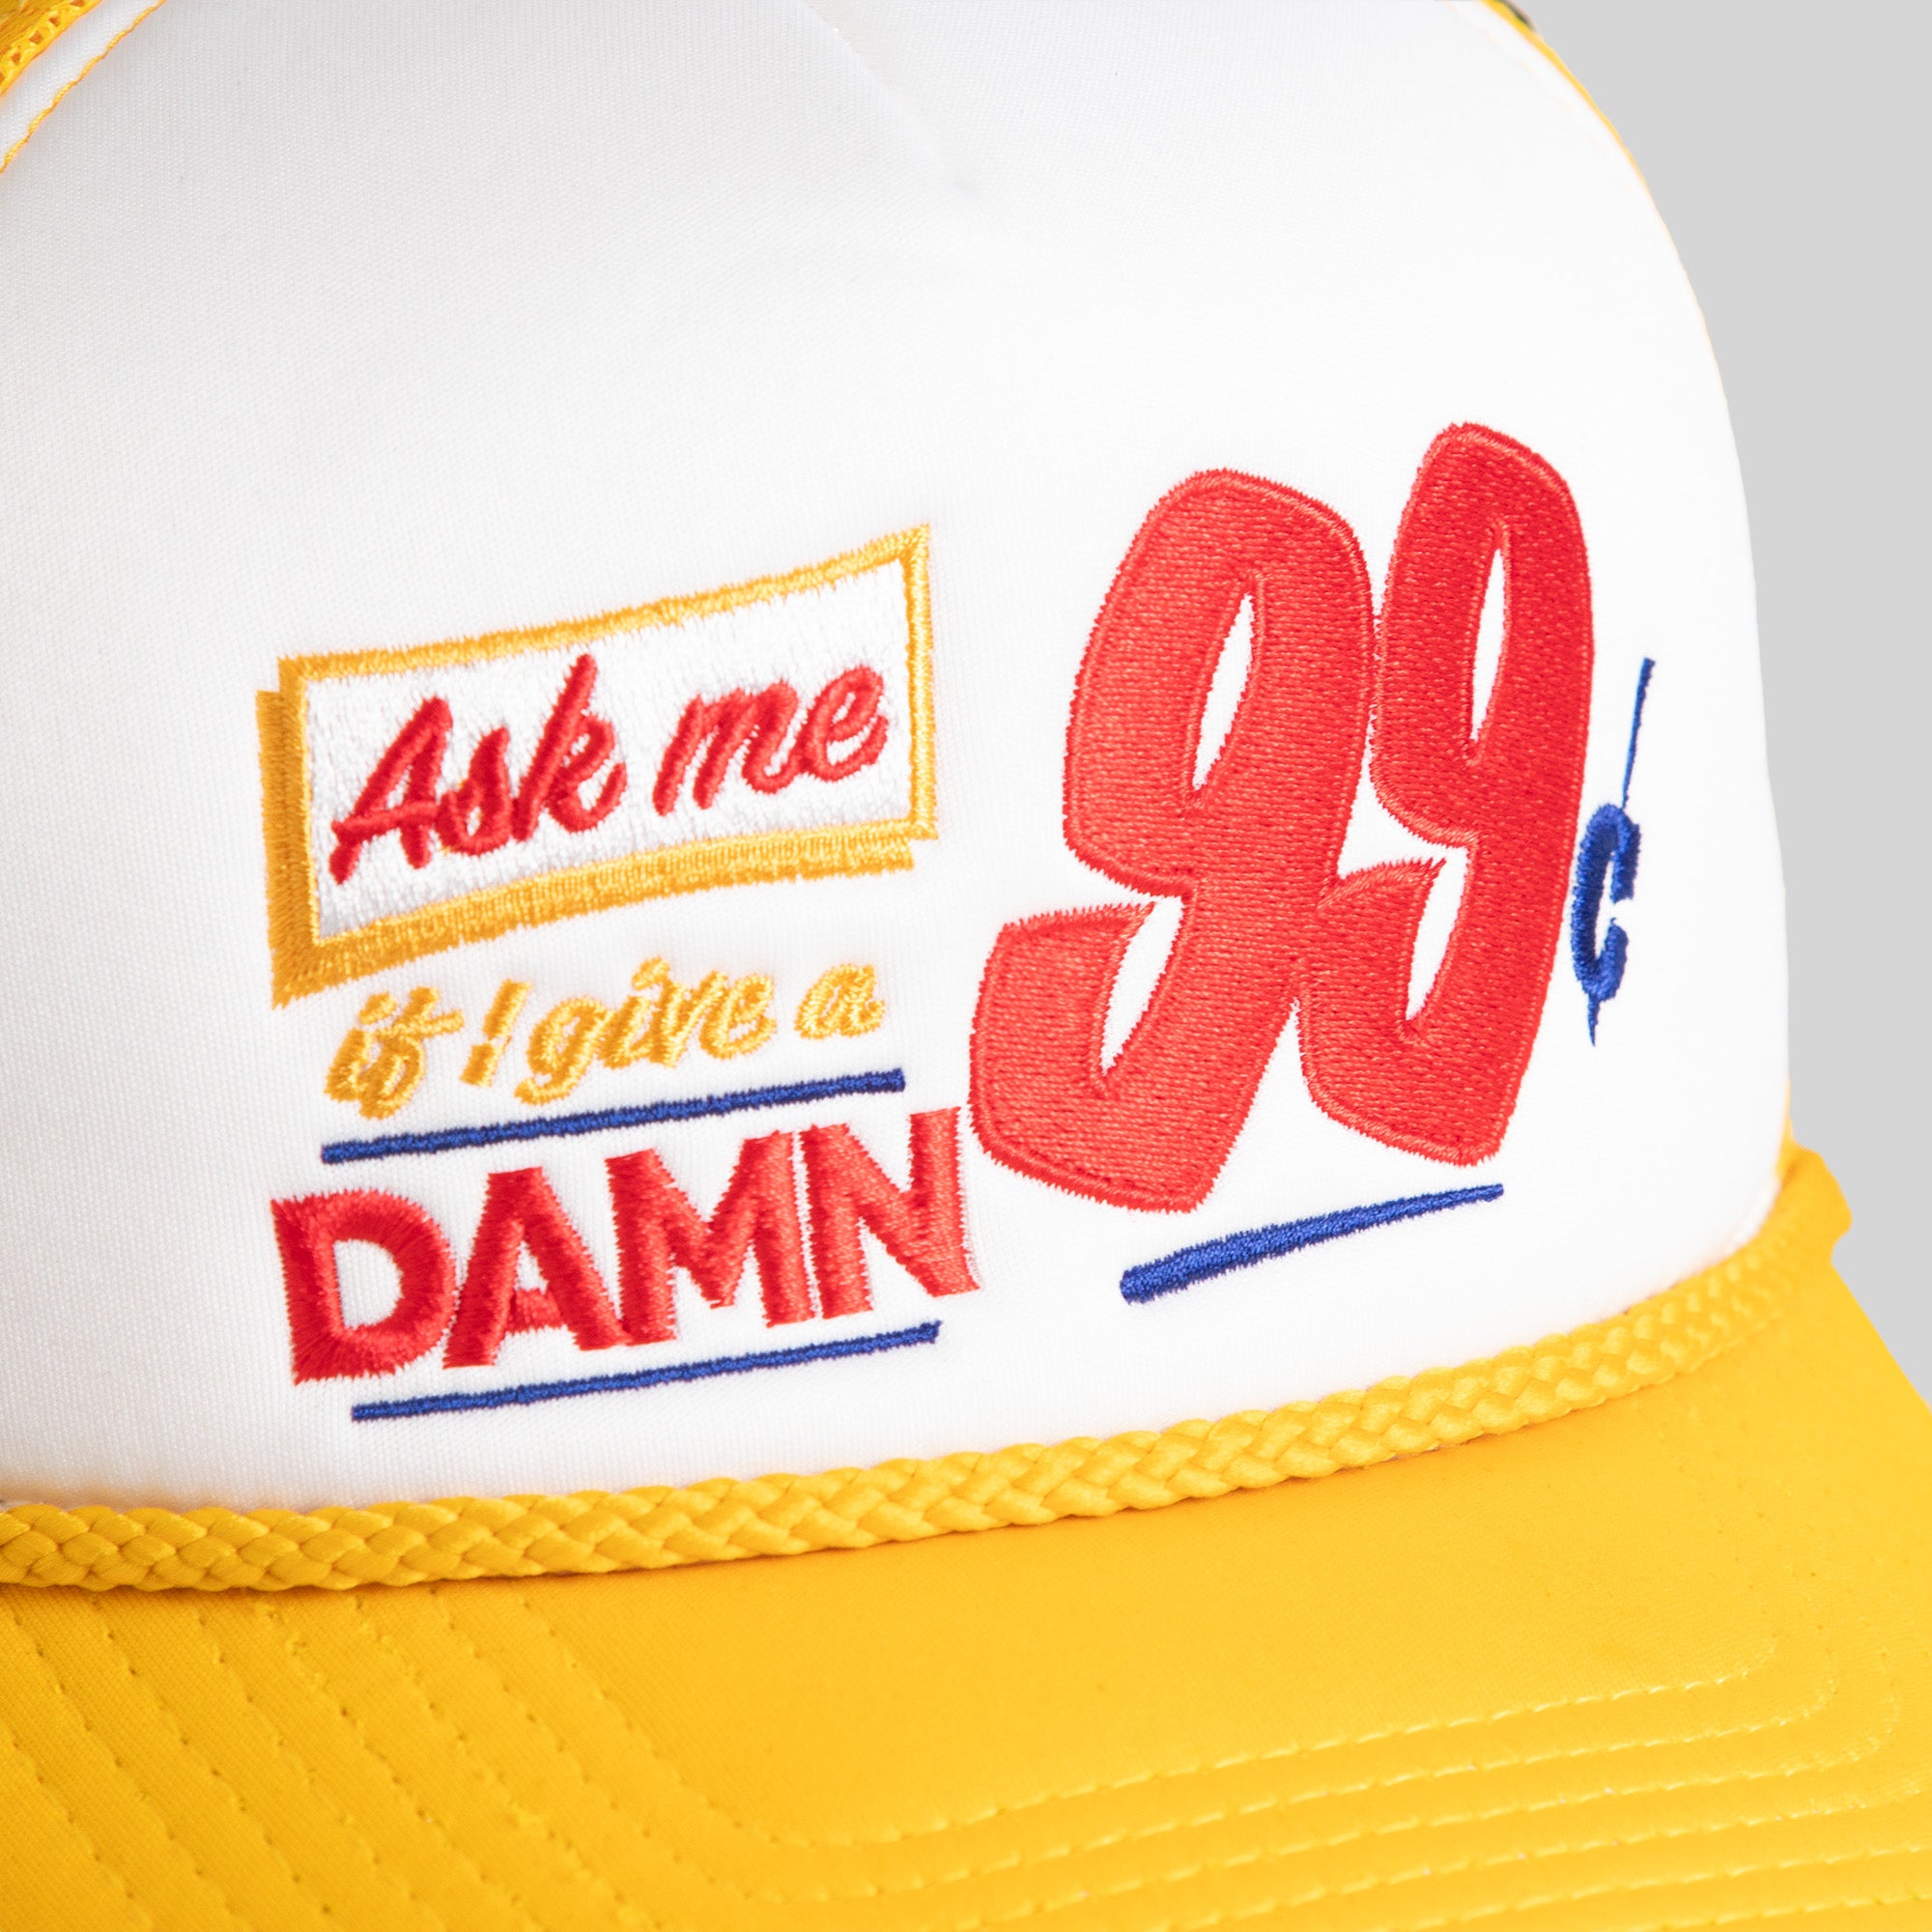 ASK ME WHITE YELLOW GOLD TRUCKER HAT